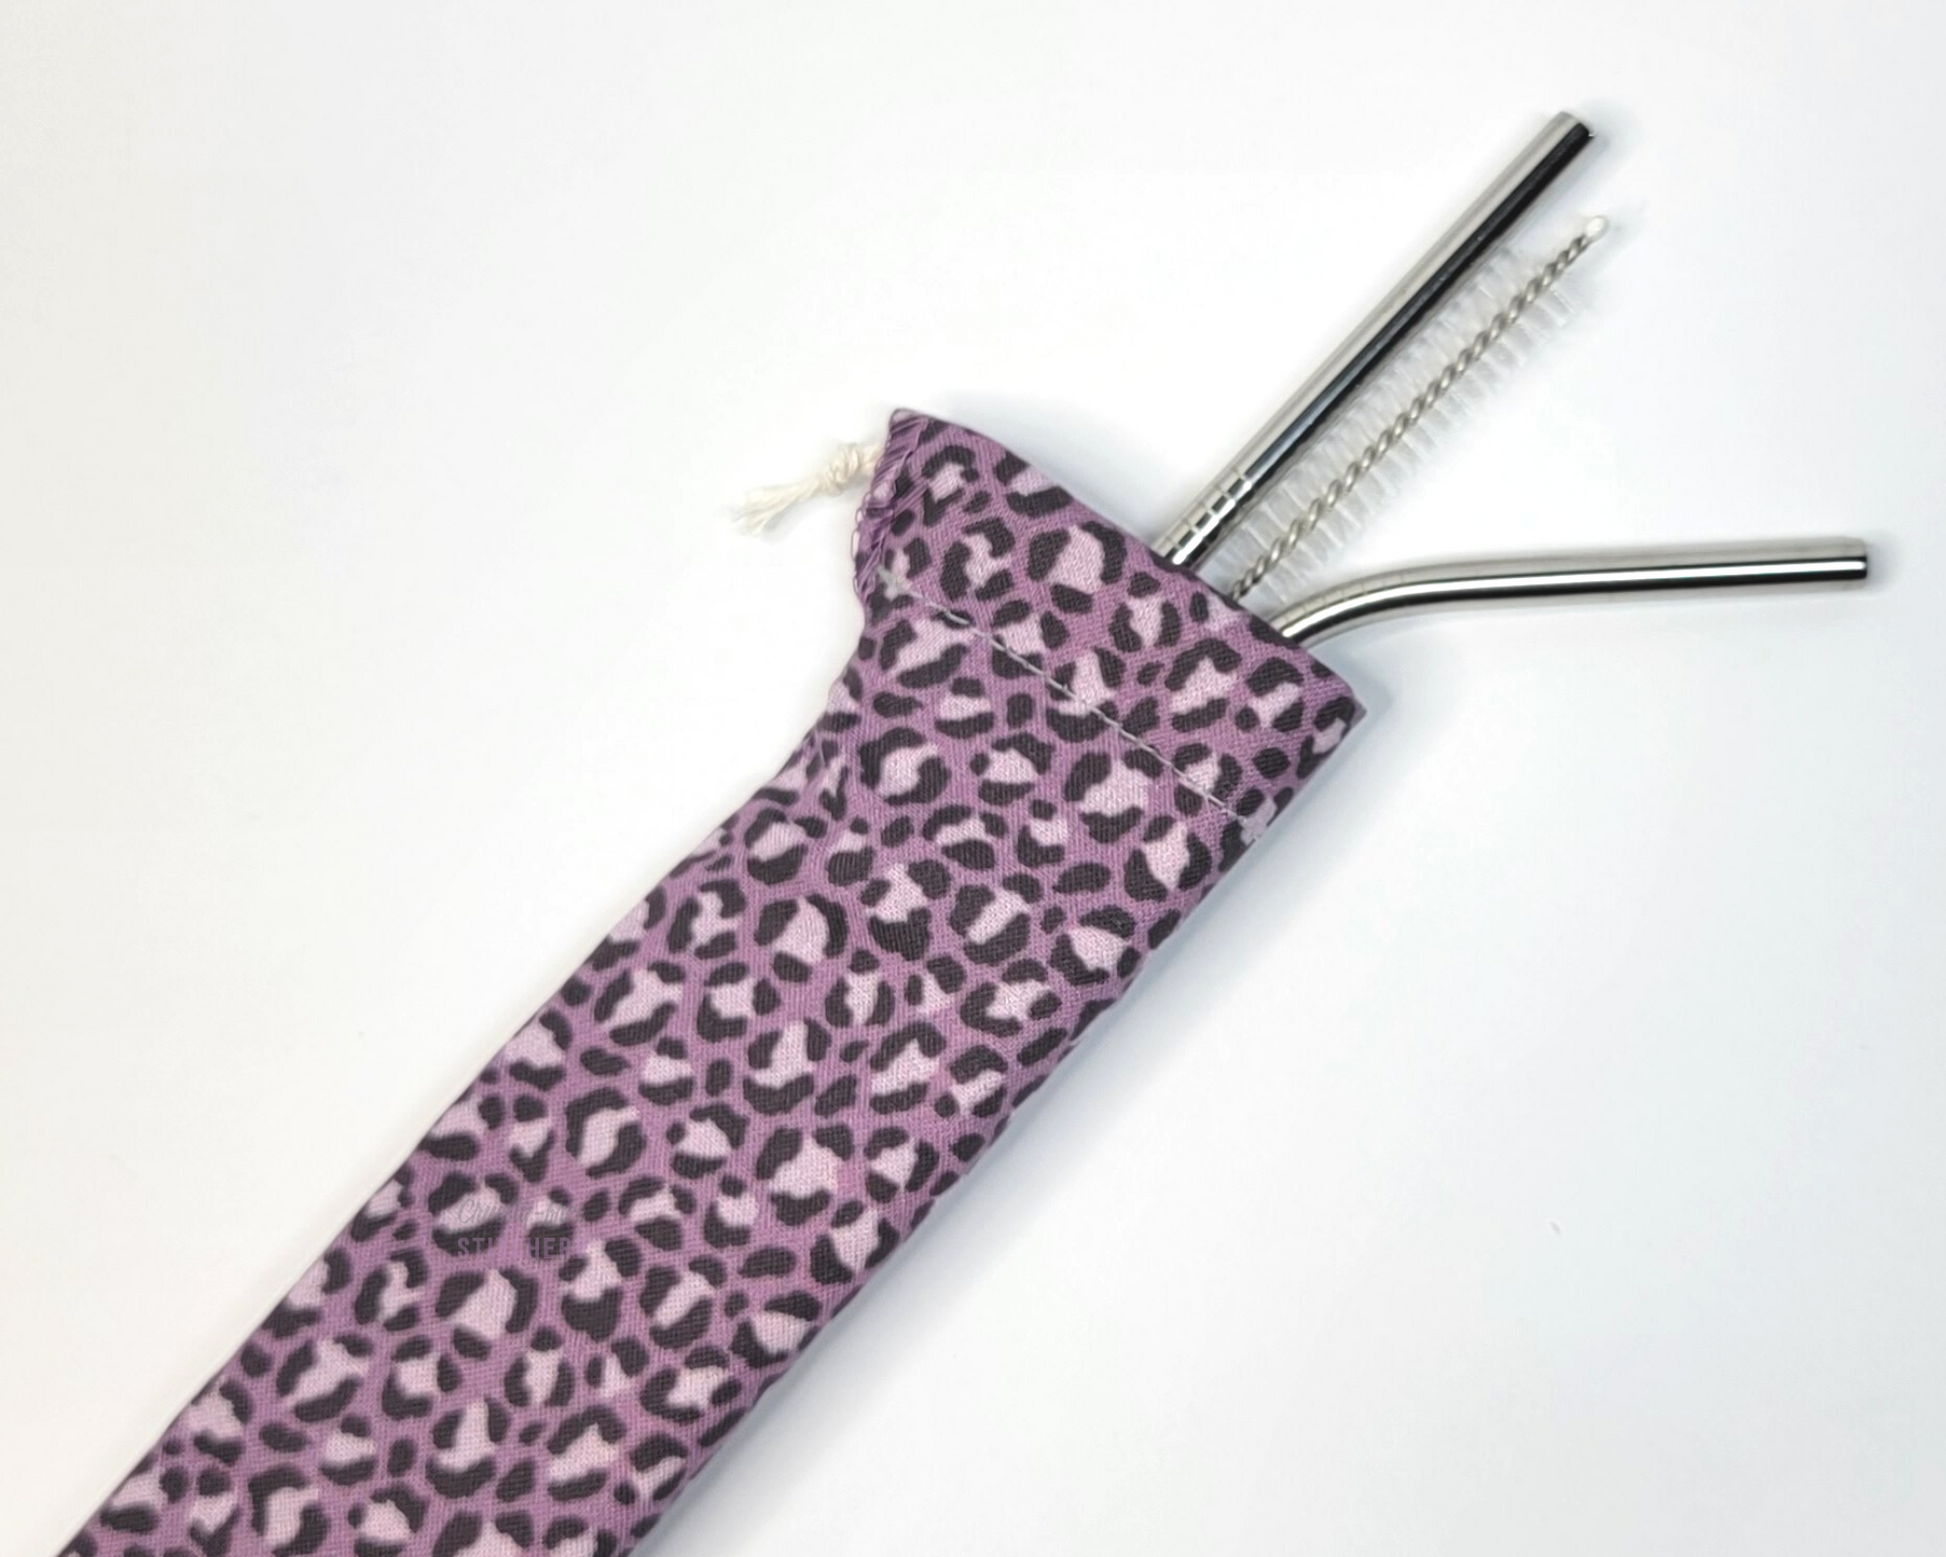 Reusable straw pouch with stainless steel straws sticking out the top. The fabric of the pouch is a muted violet purple leopard print and it has a drawstring closure.